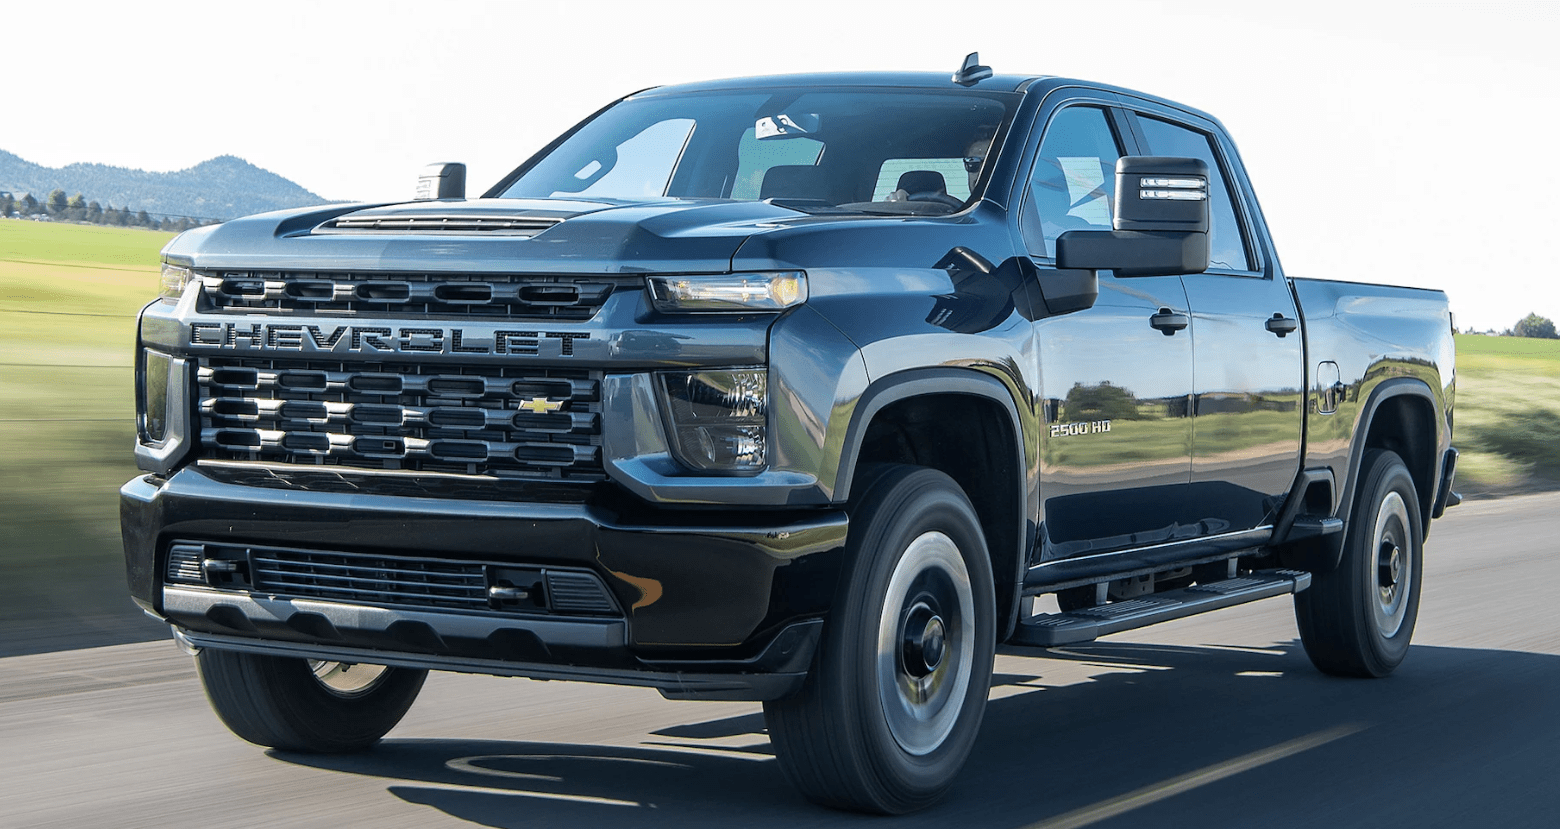 2025 Chevy Silverado 2500hd Release Date And Specs The Cars Magz